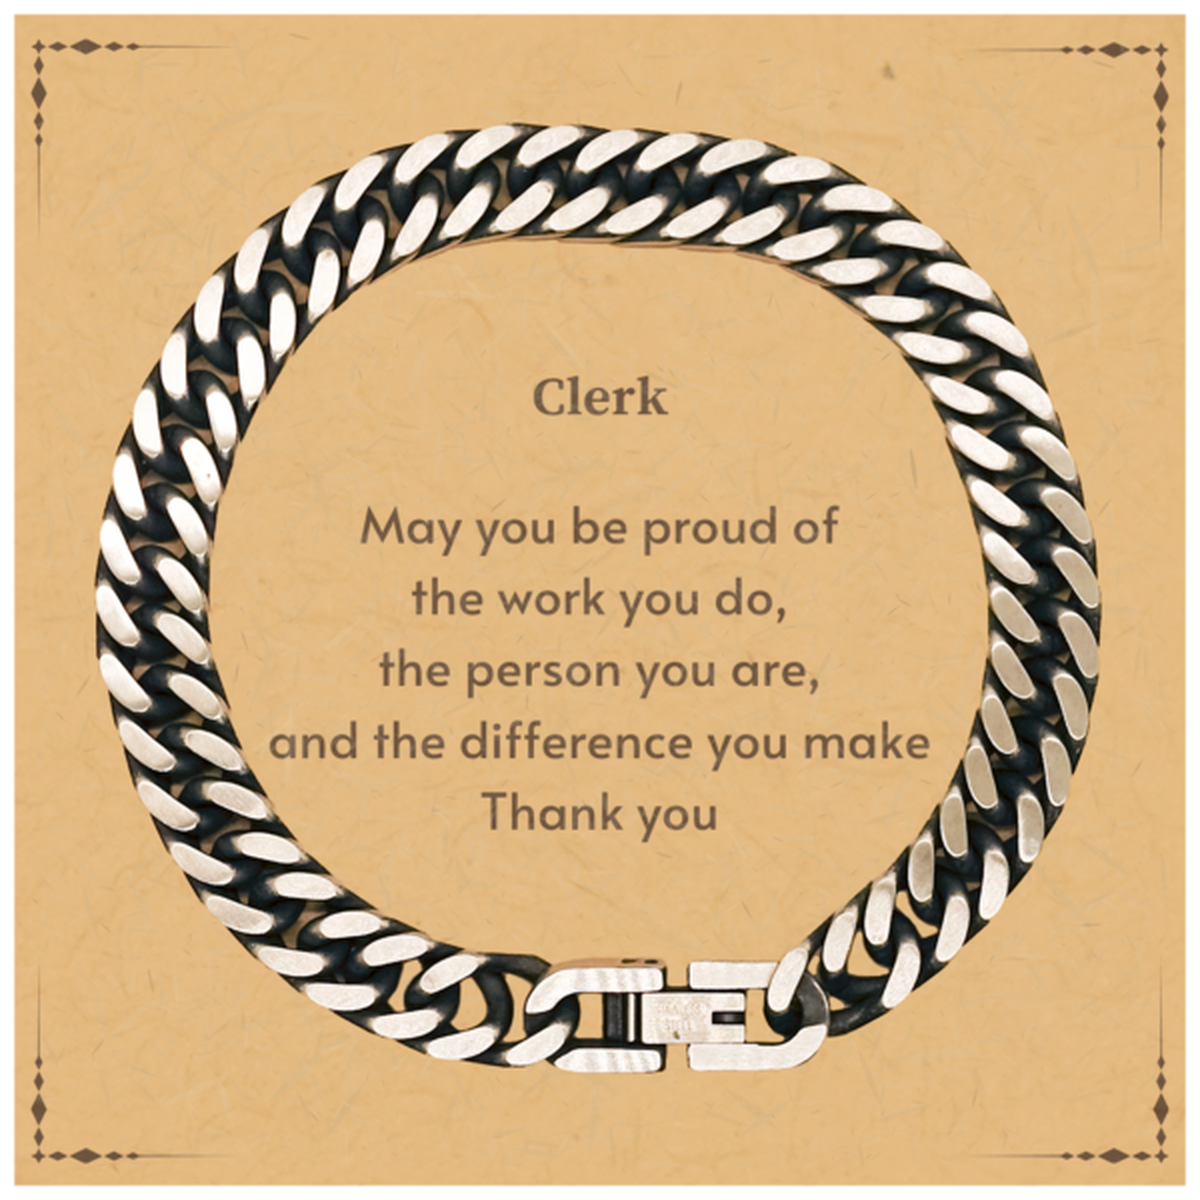 Heartwarming Cuban Link Chain Bracelet Retirement Coworkers Gifts for Clerk, Clerk May You be proud of the work you do, the person you are Gifts for Boss Men Women Friends